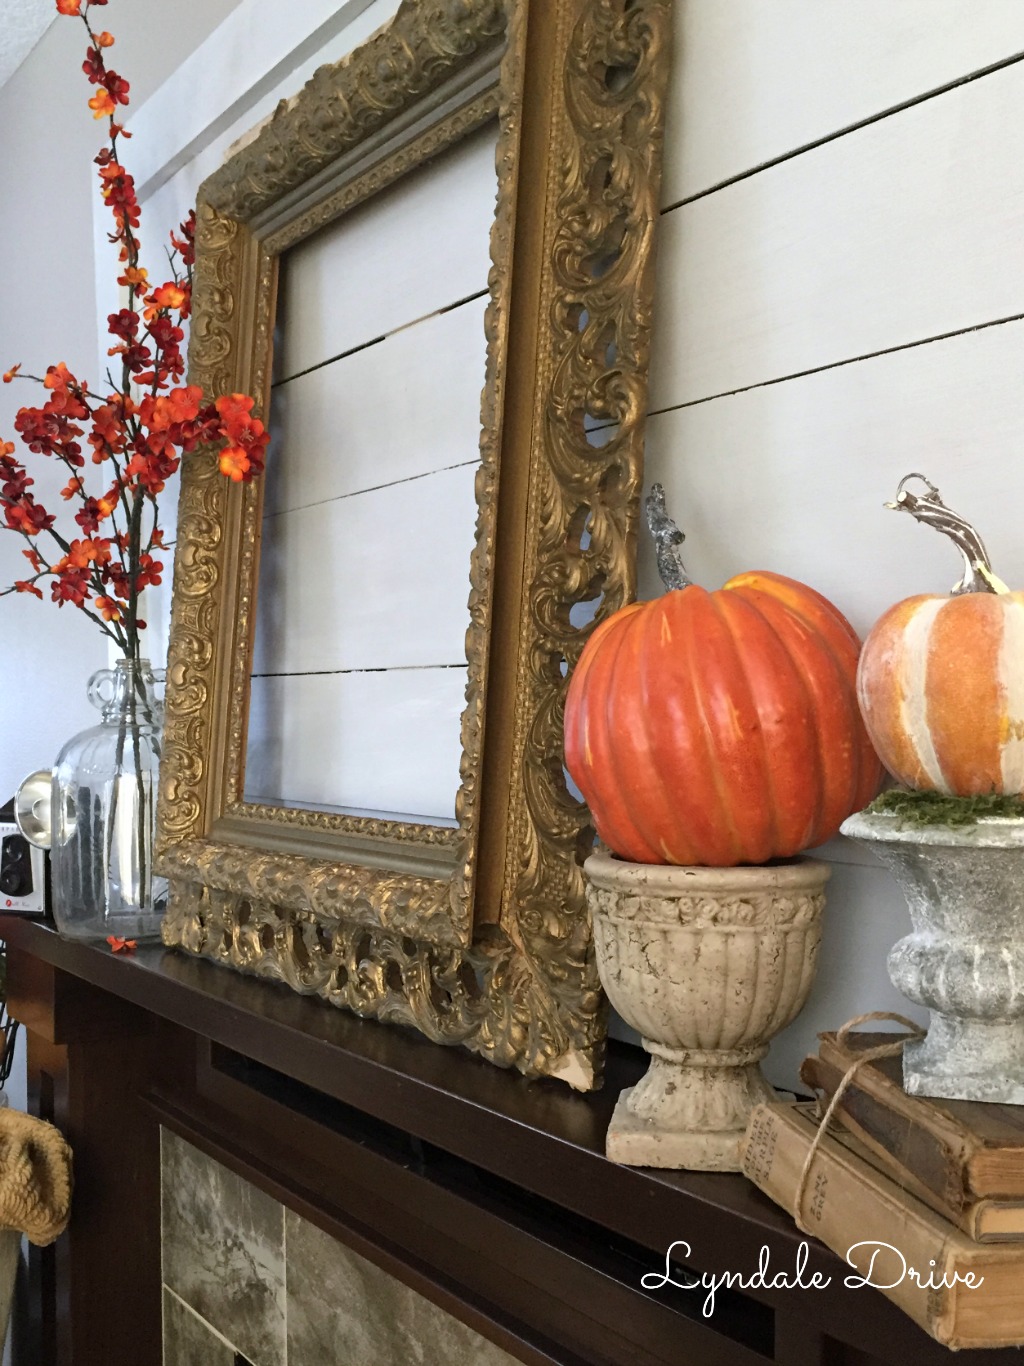 Decorating a Mantel for Fall on a Budget